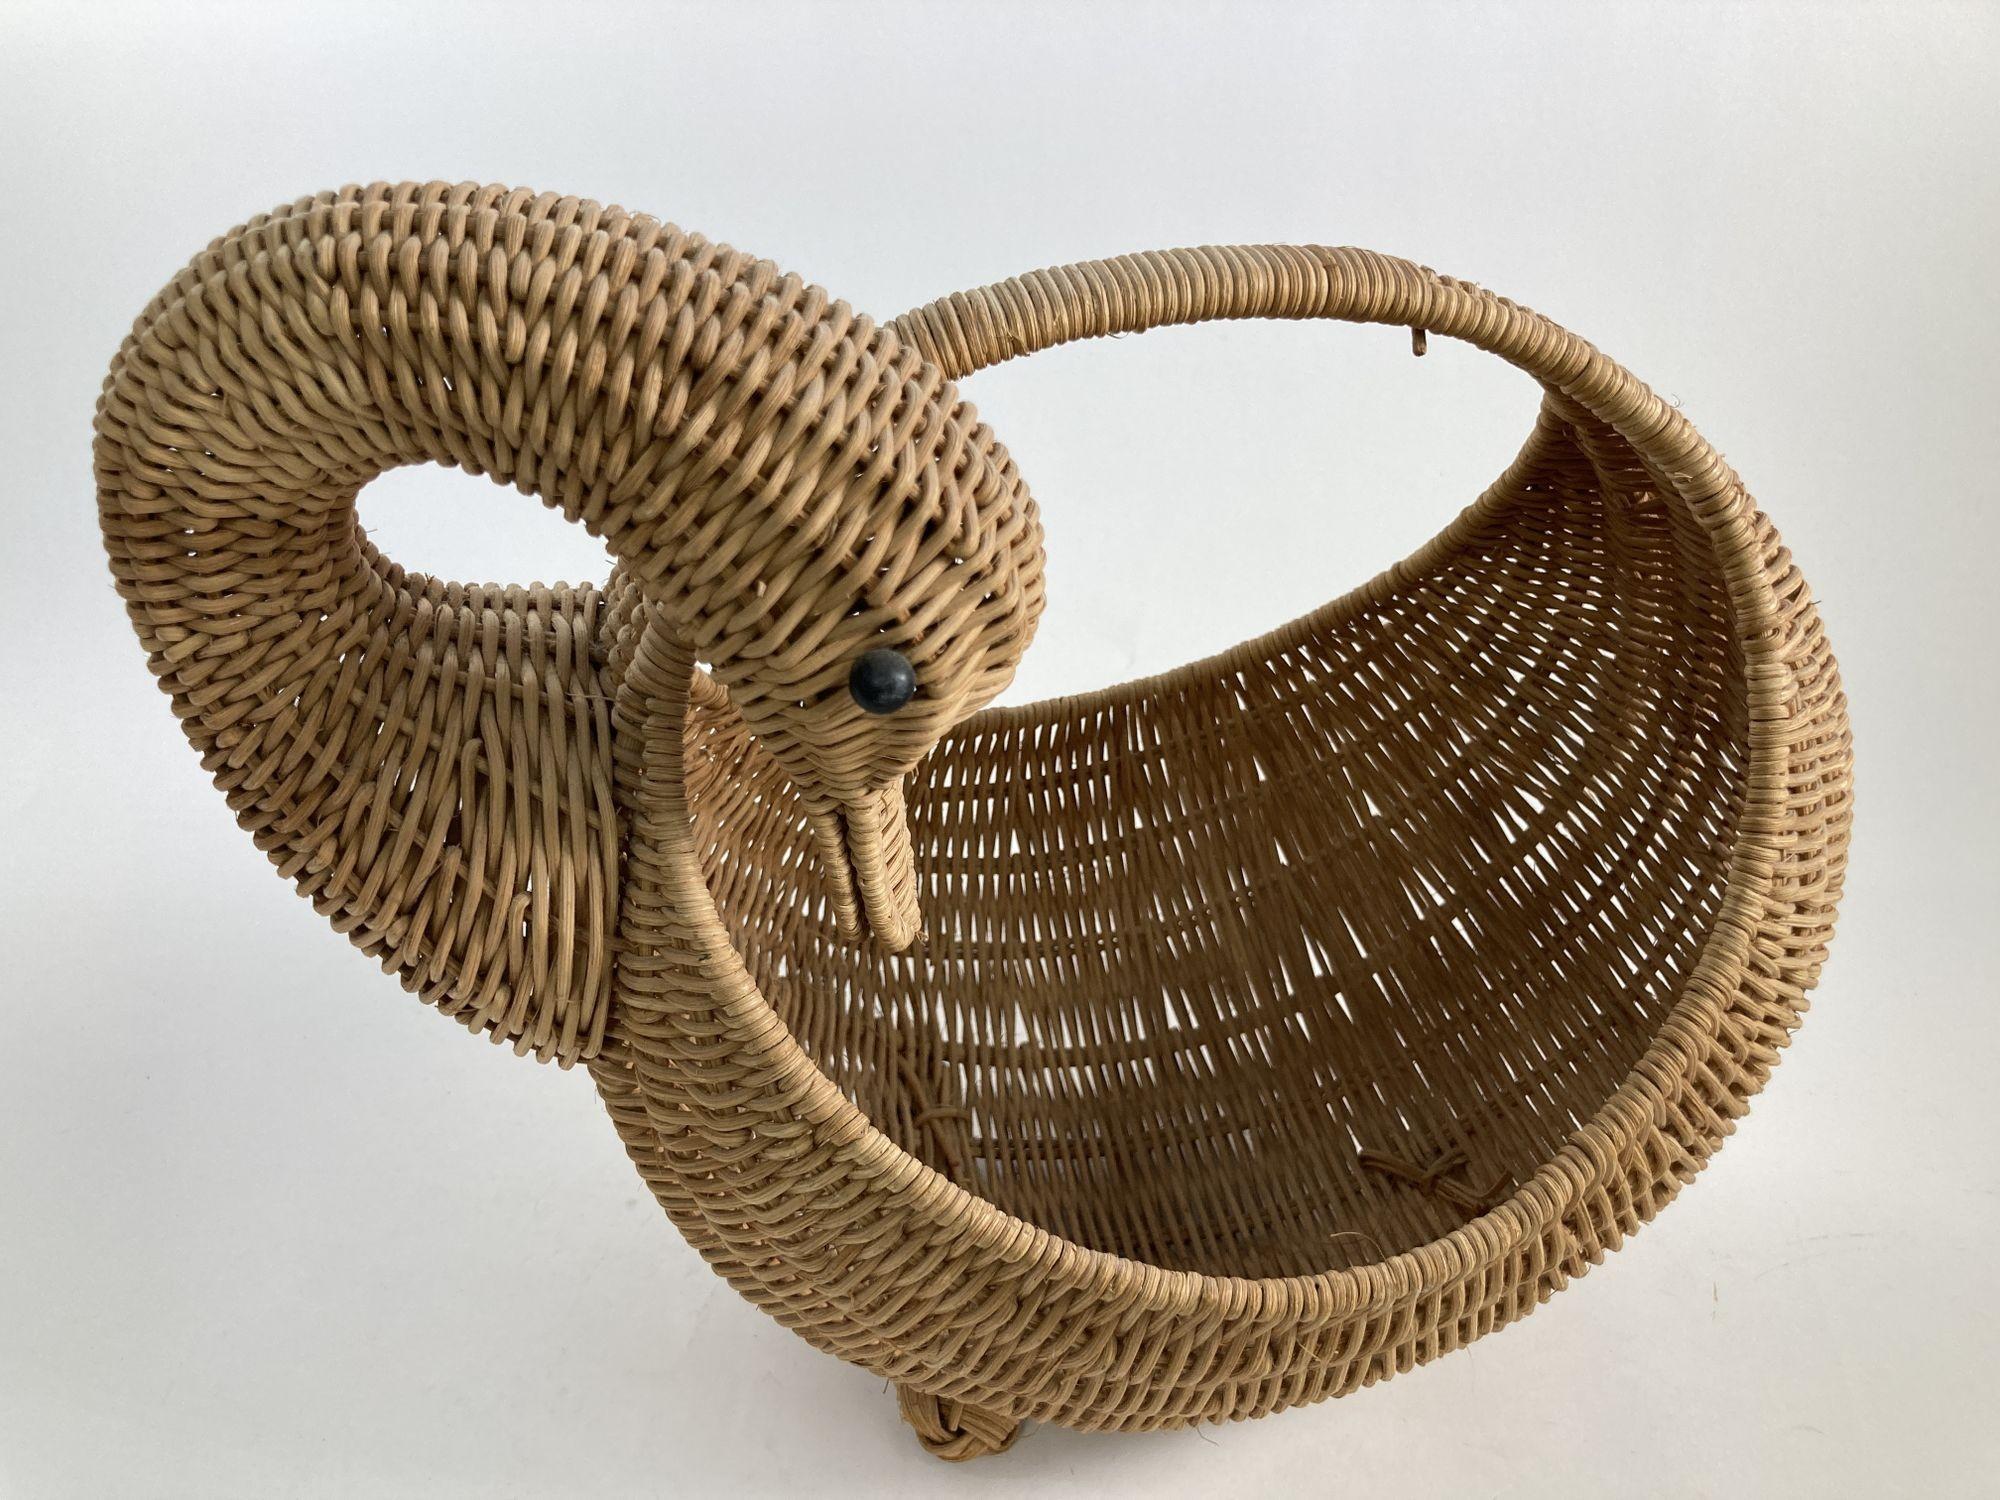 Mid Century Italian vintage hand woven rattan wicker duck or swan motif basket with a handle.
Collectible rattan hand woven swan sculpture basket
Beautiful and rare vintage Mid Century Italian wicker basket that is in excellent condition.
The